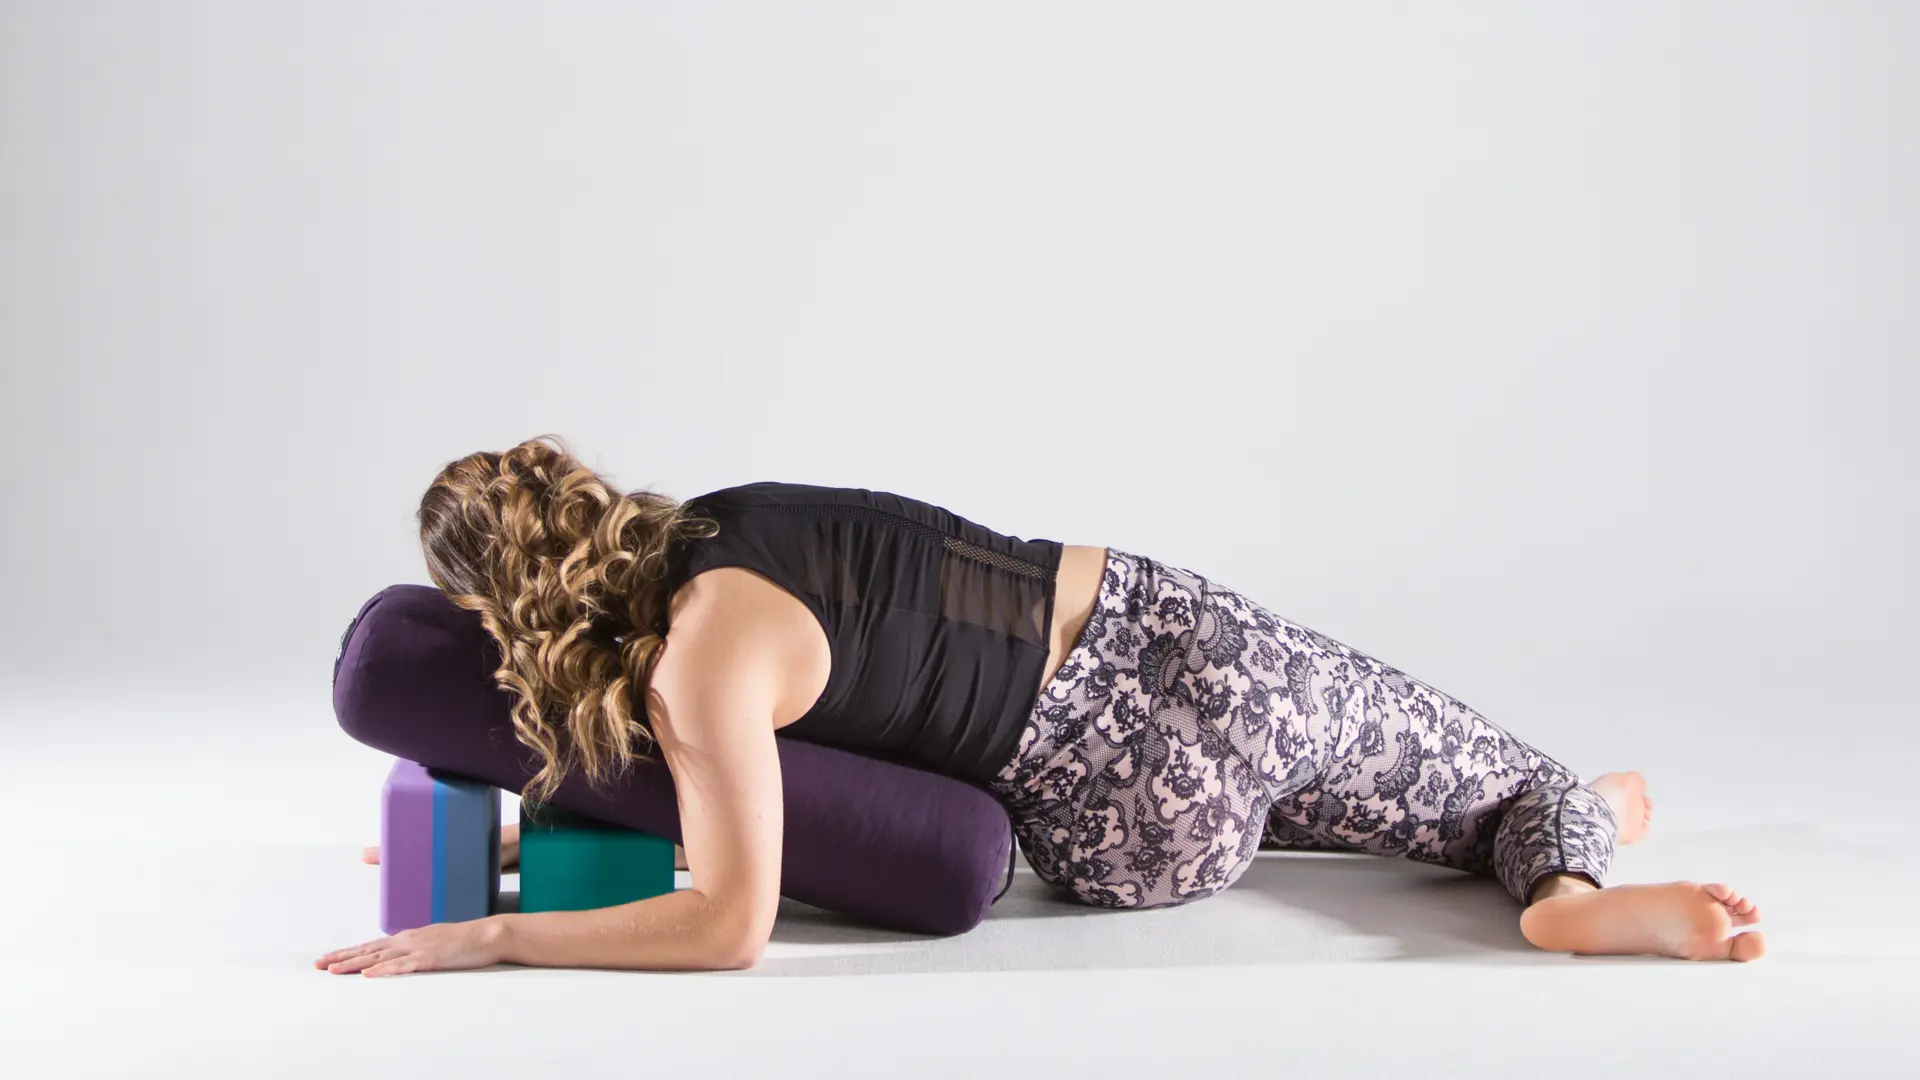 yin yoga poses with bolster - How long to hold poses in yin yoga